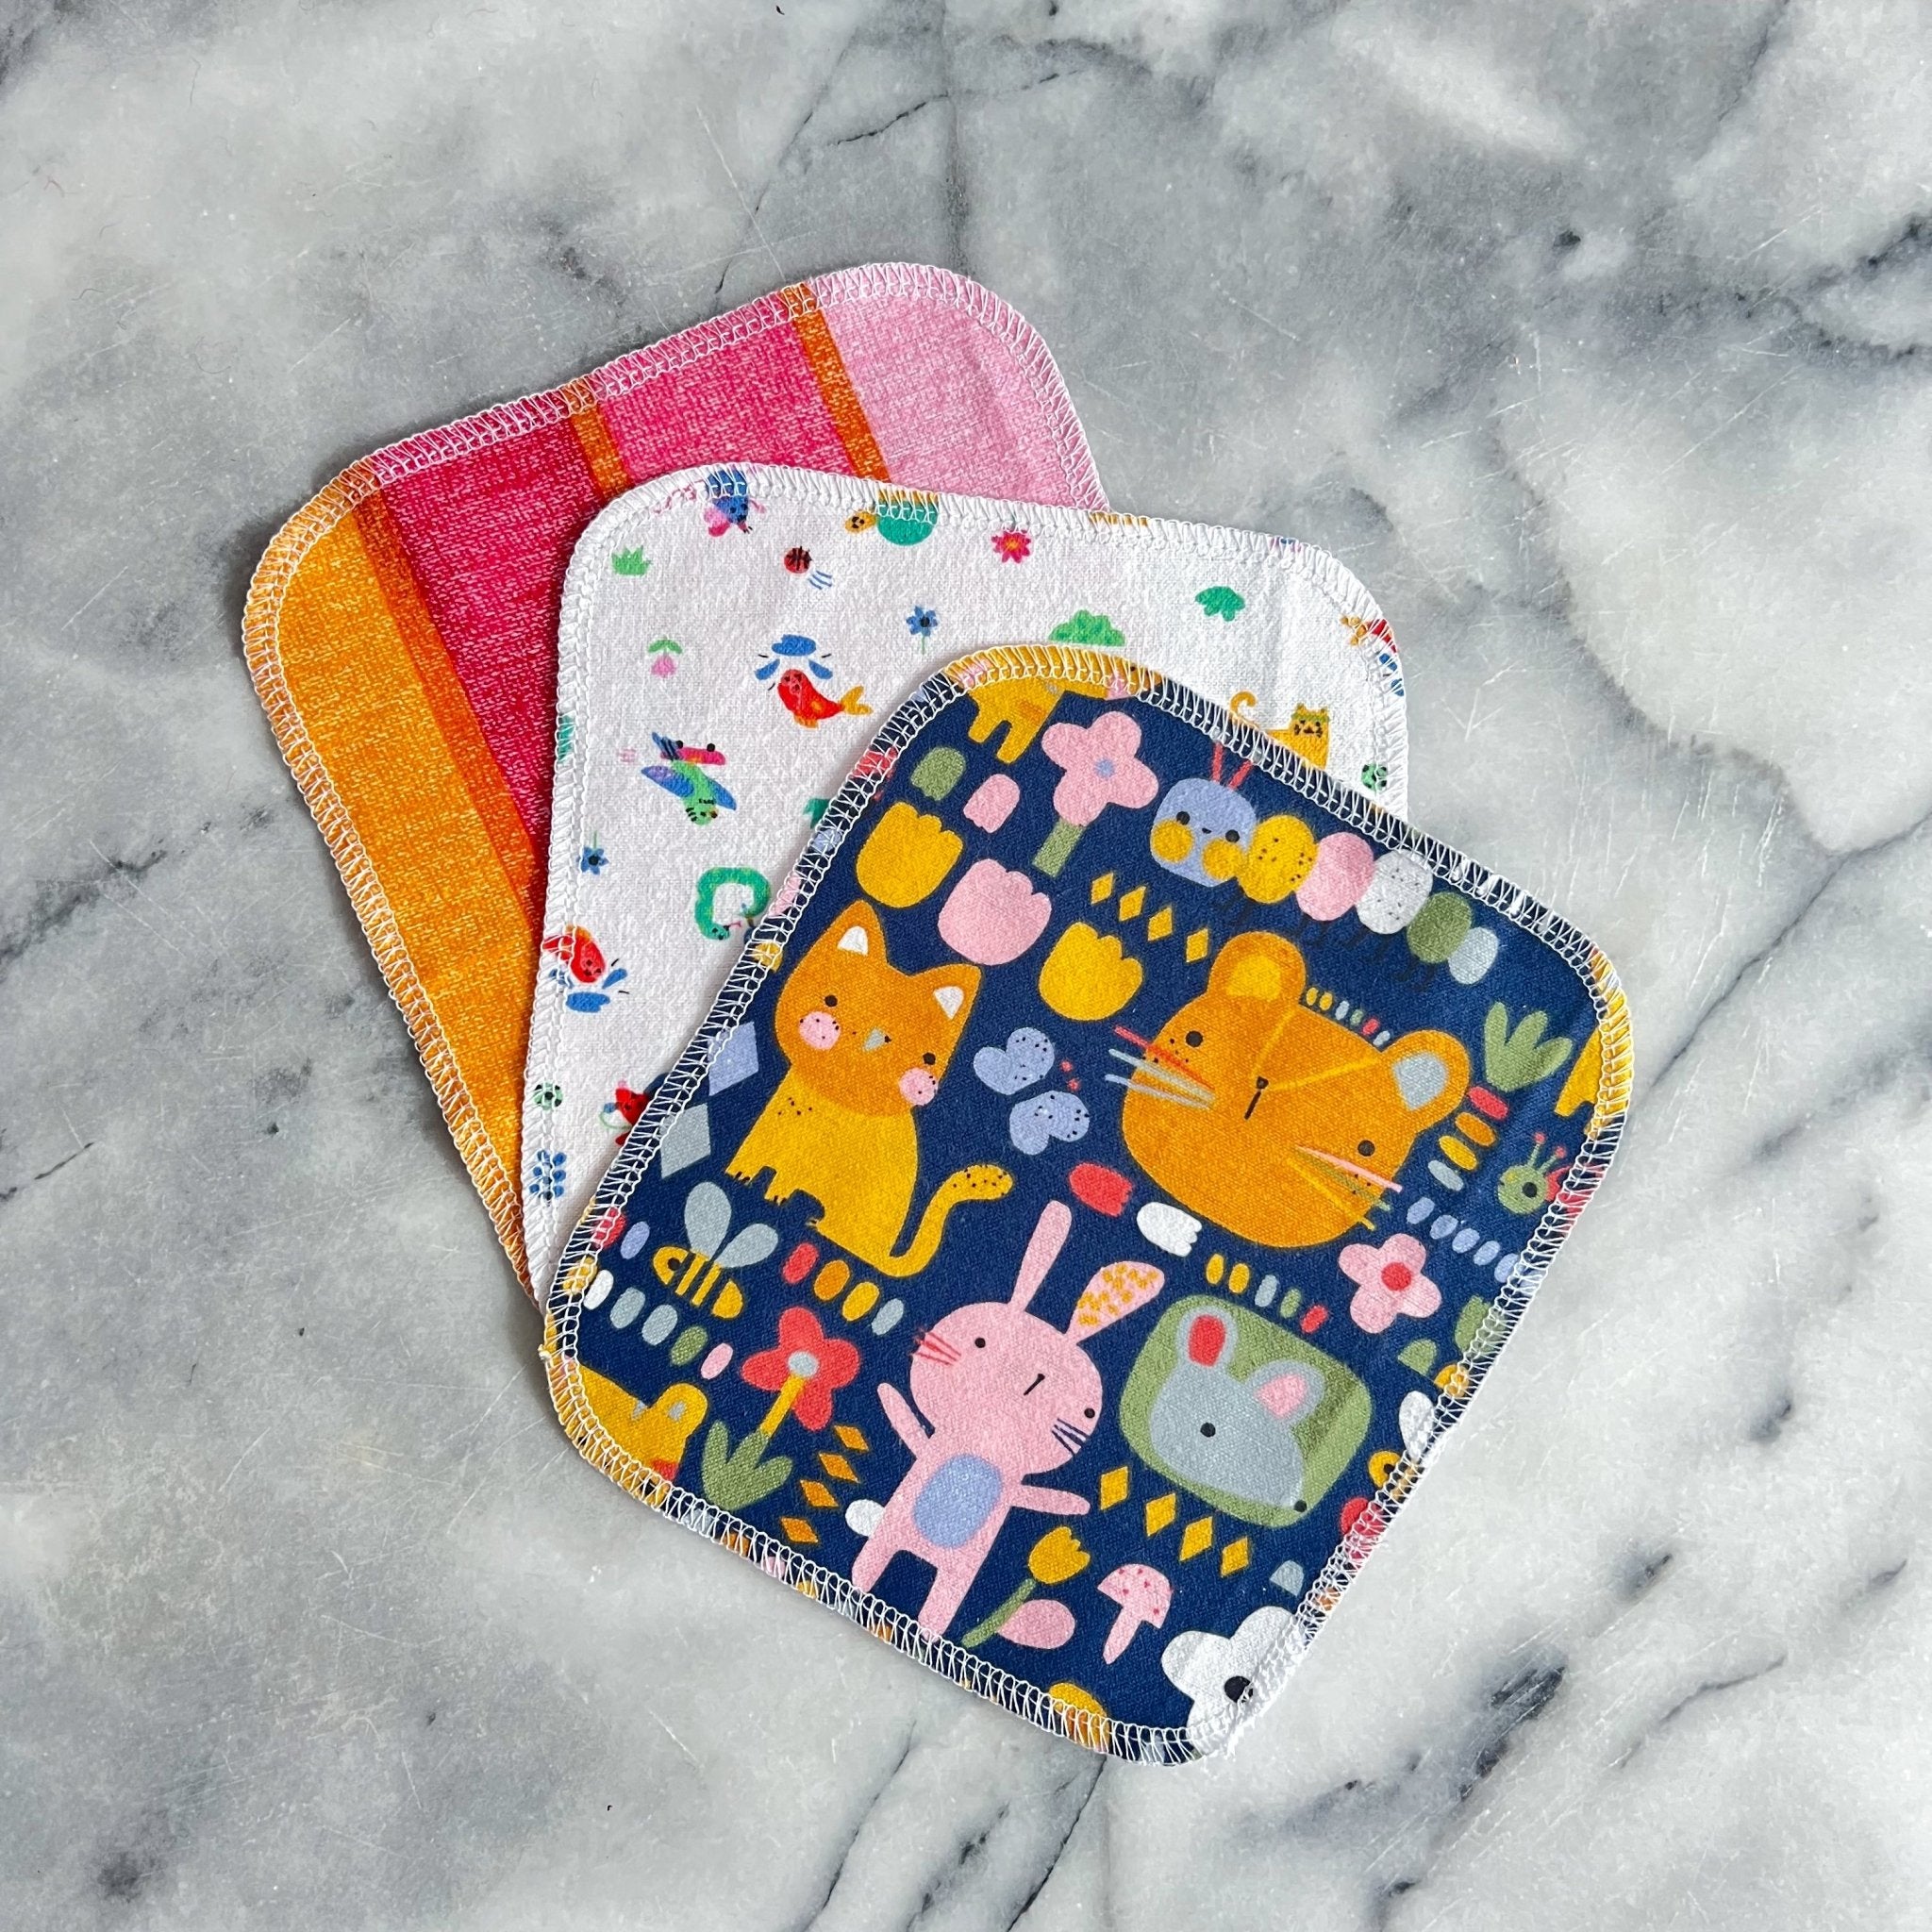 **Overstock** Cloth Wipes: Themed Prints - Marley&#39;s Monsters